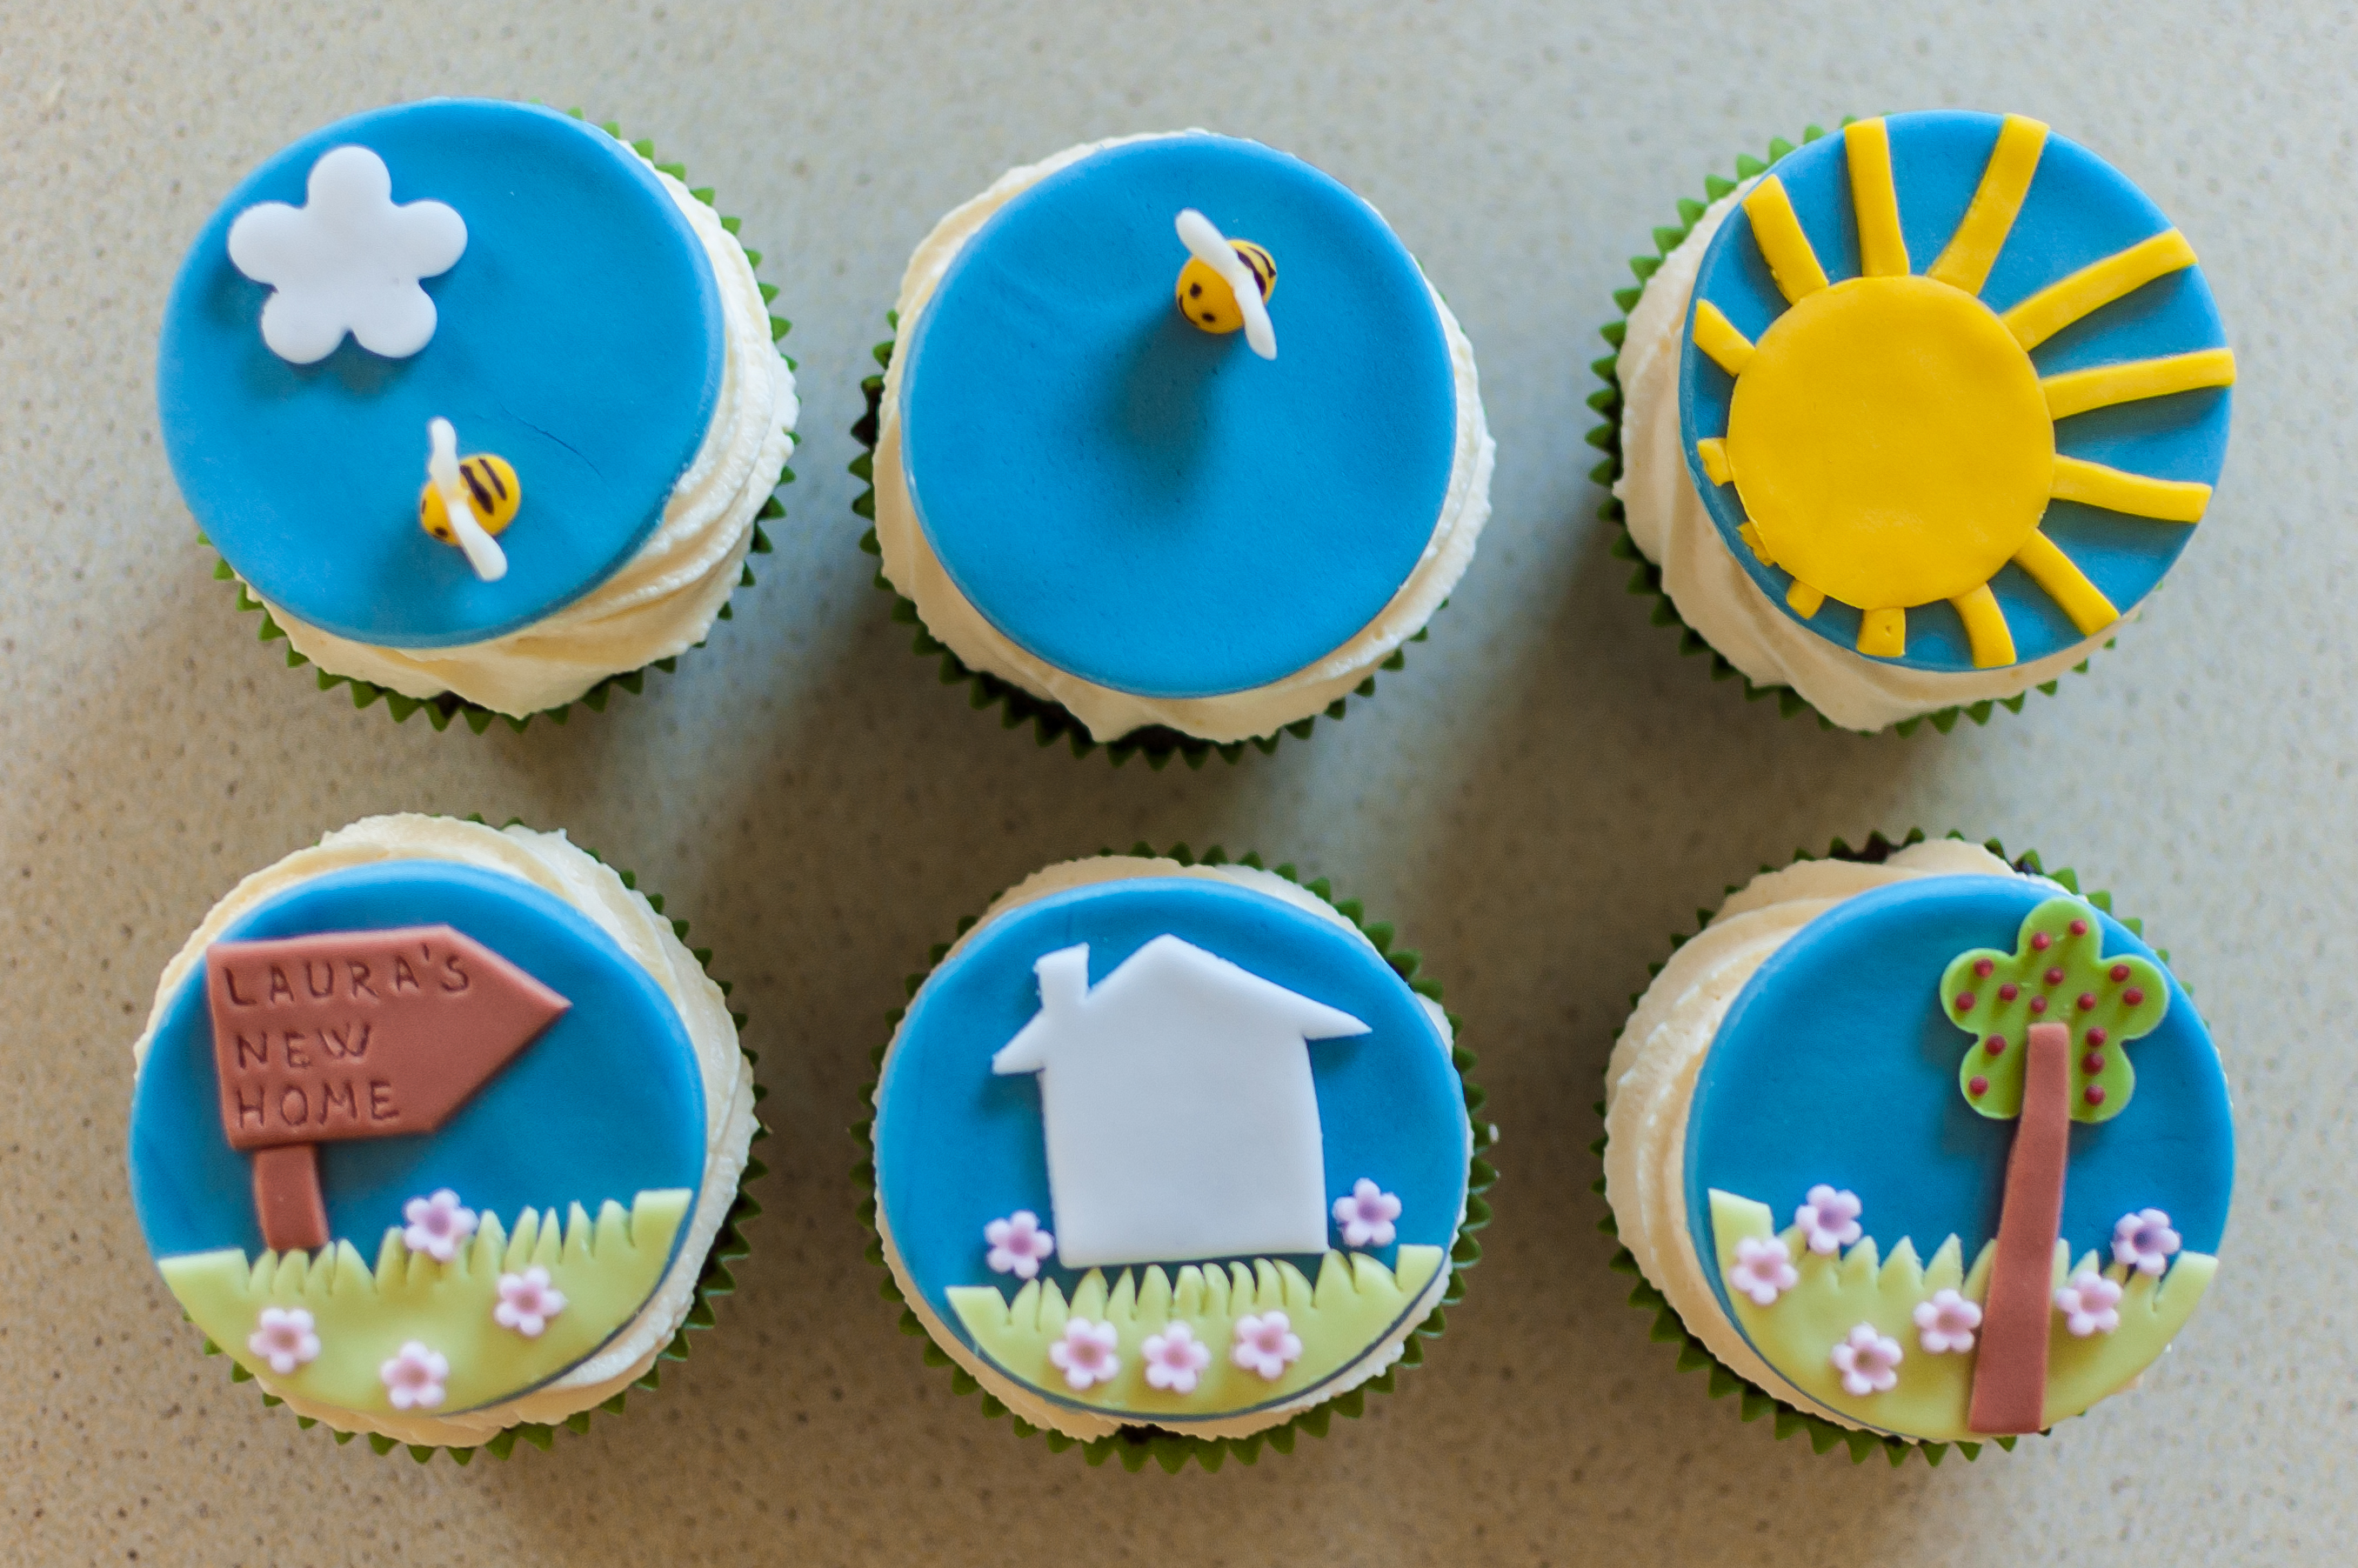 New Home Cupcakes Olisons Cupcakes focus for New Home Cupcake Decorations